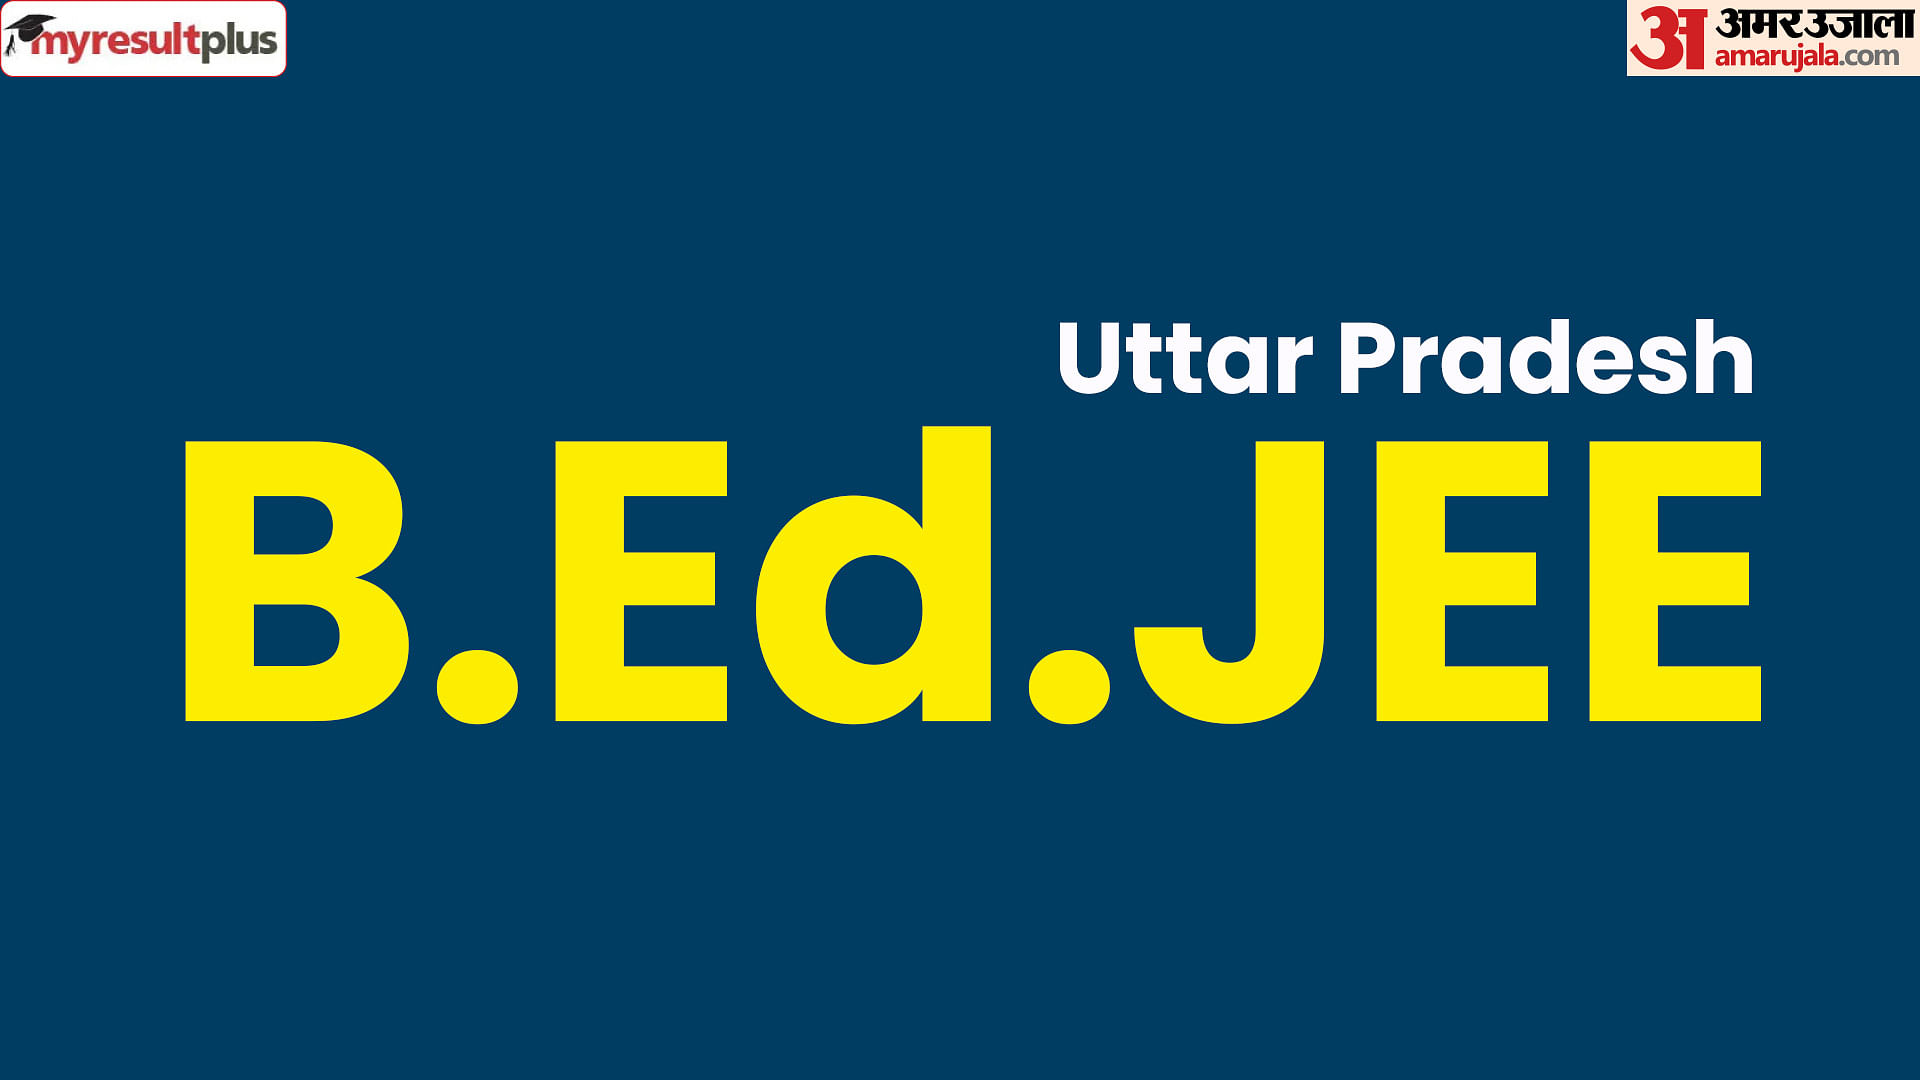 UP BEd JEE 2023 Result Released at bujhansi.ac.in, Here's How to Check